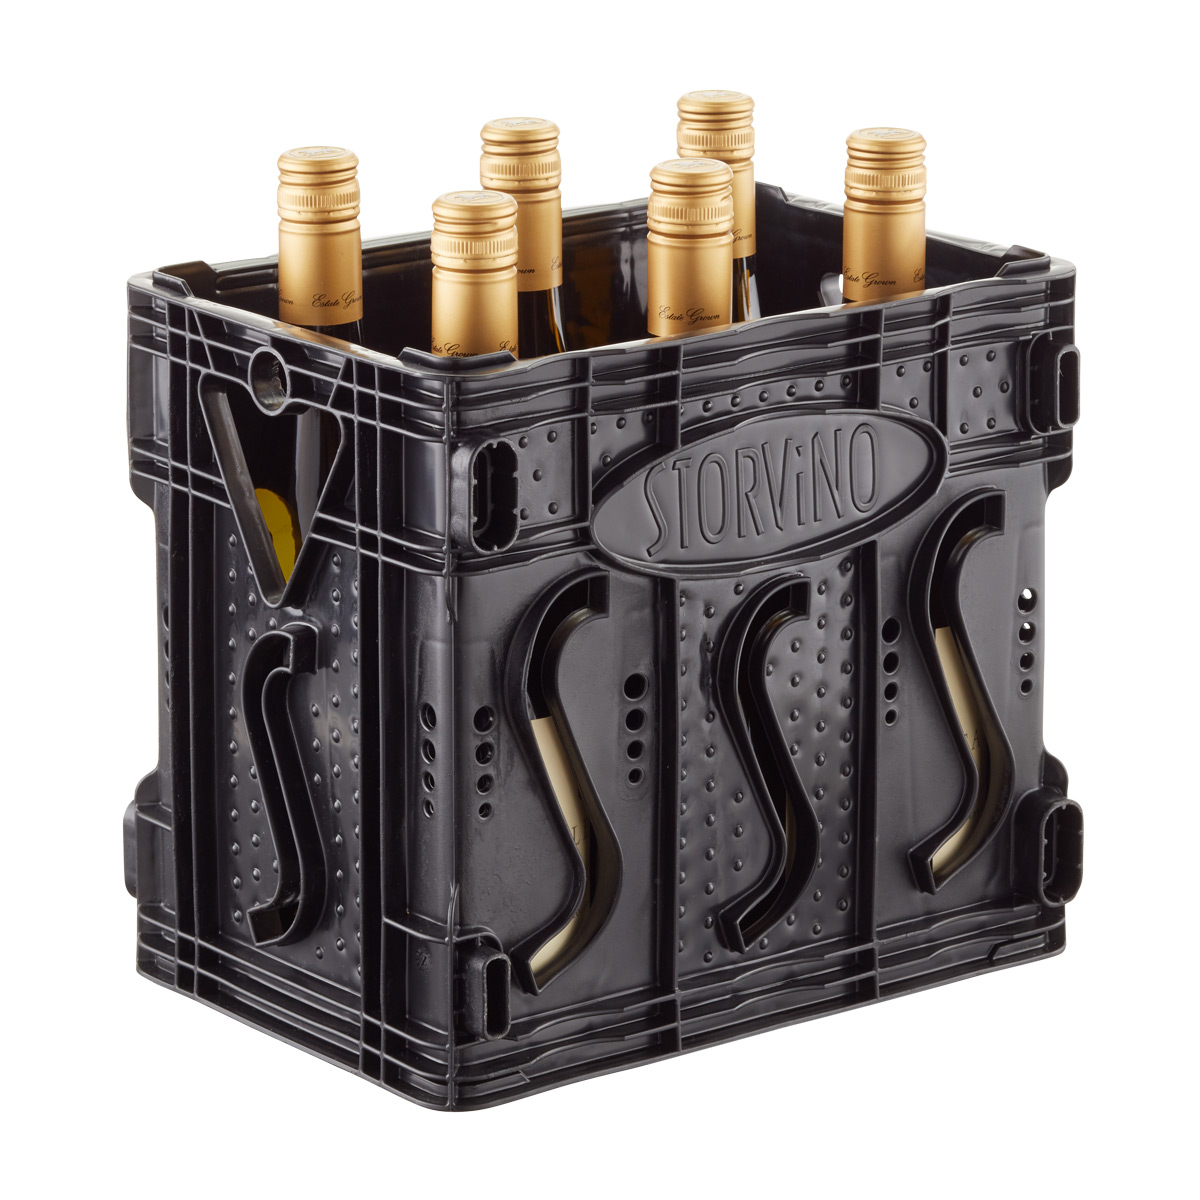 Storvino Wine Crate  The Container Store